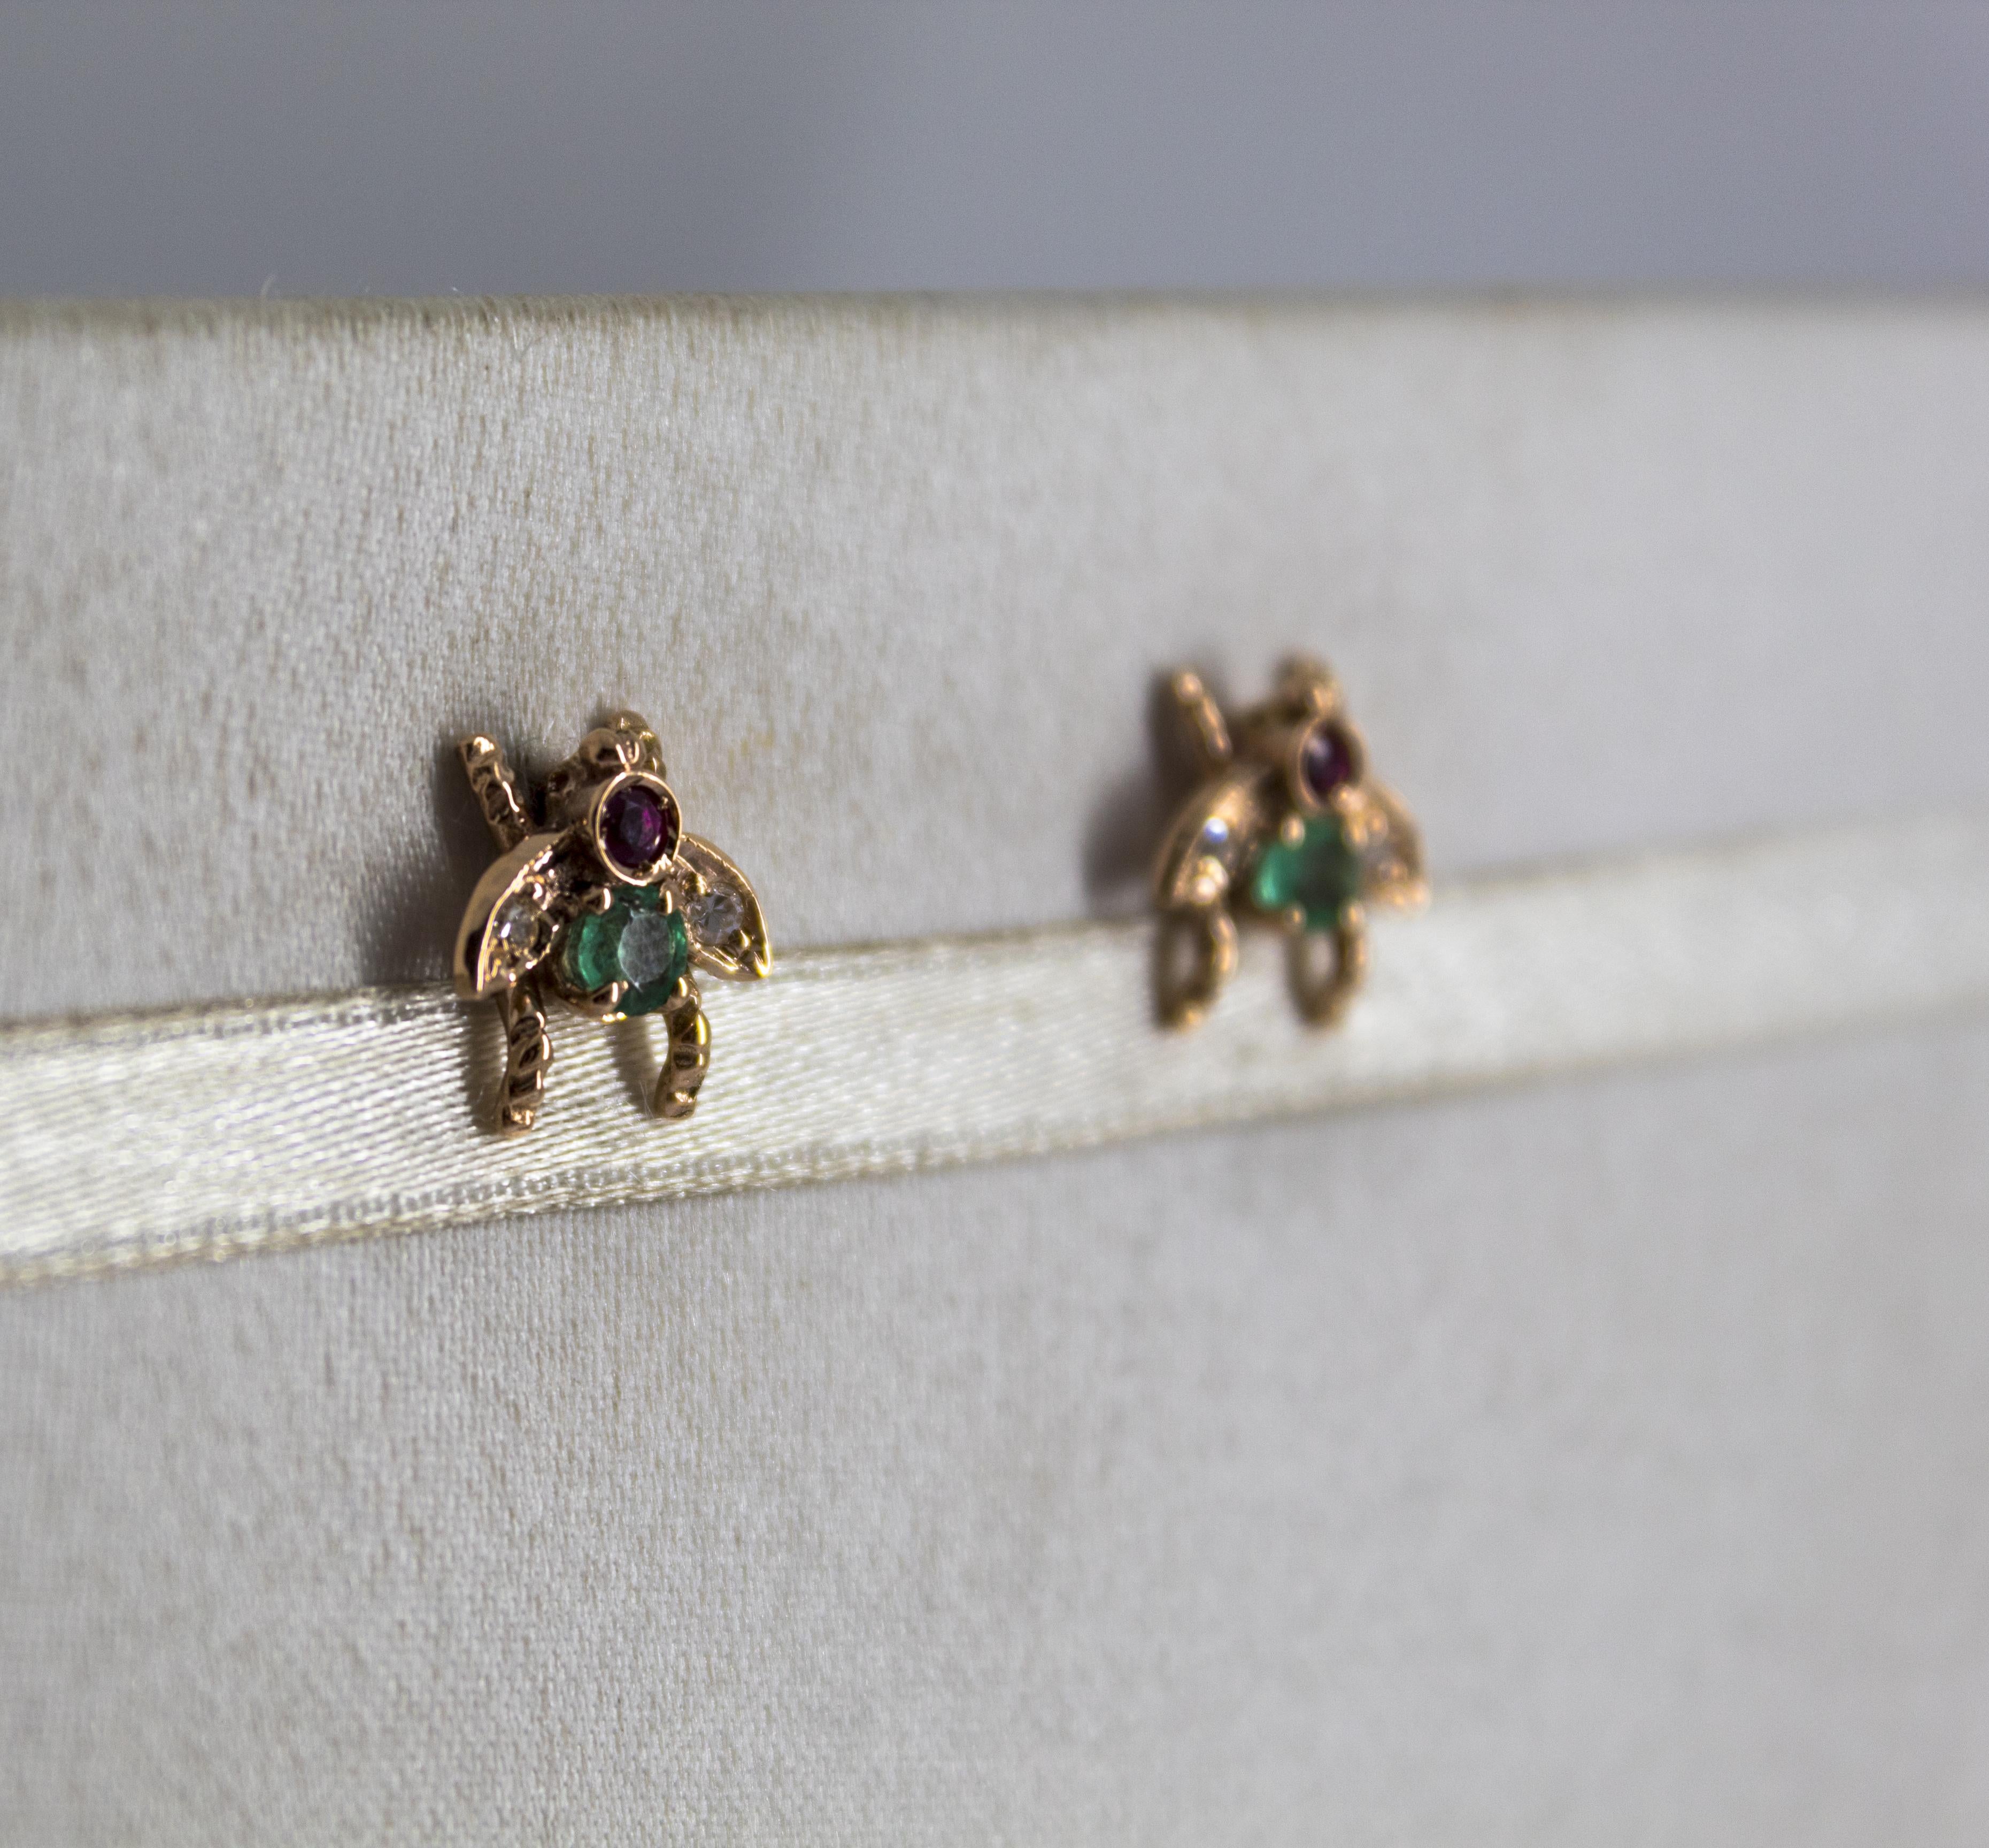 These Stud Earrings are made of 9K Yellow Gold.
These Earrings have 0.08 Carats of White Diamonds.
These Earrings have 0.30 Carats of Emeralds and Rubies.
These Earrings are available also with Blue Sapphires.
All our Earrings have pins for pierced